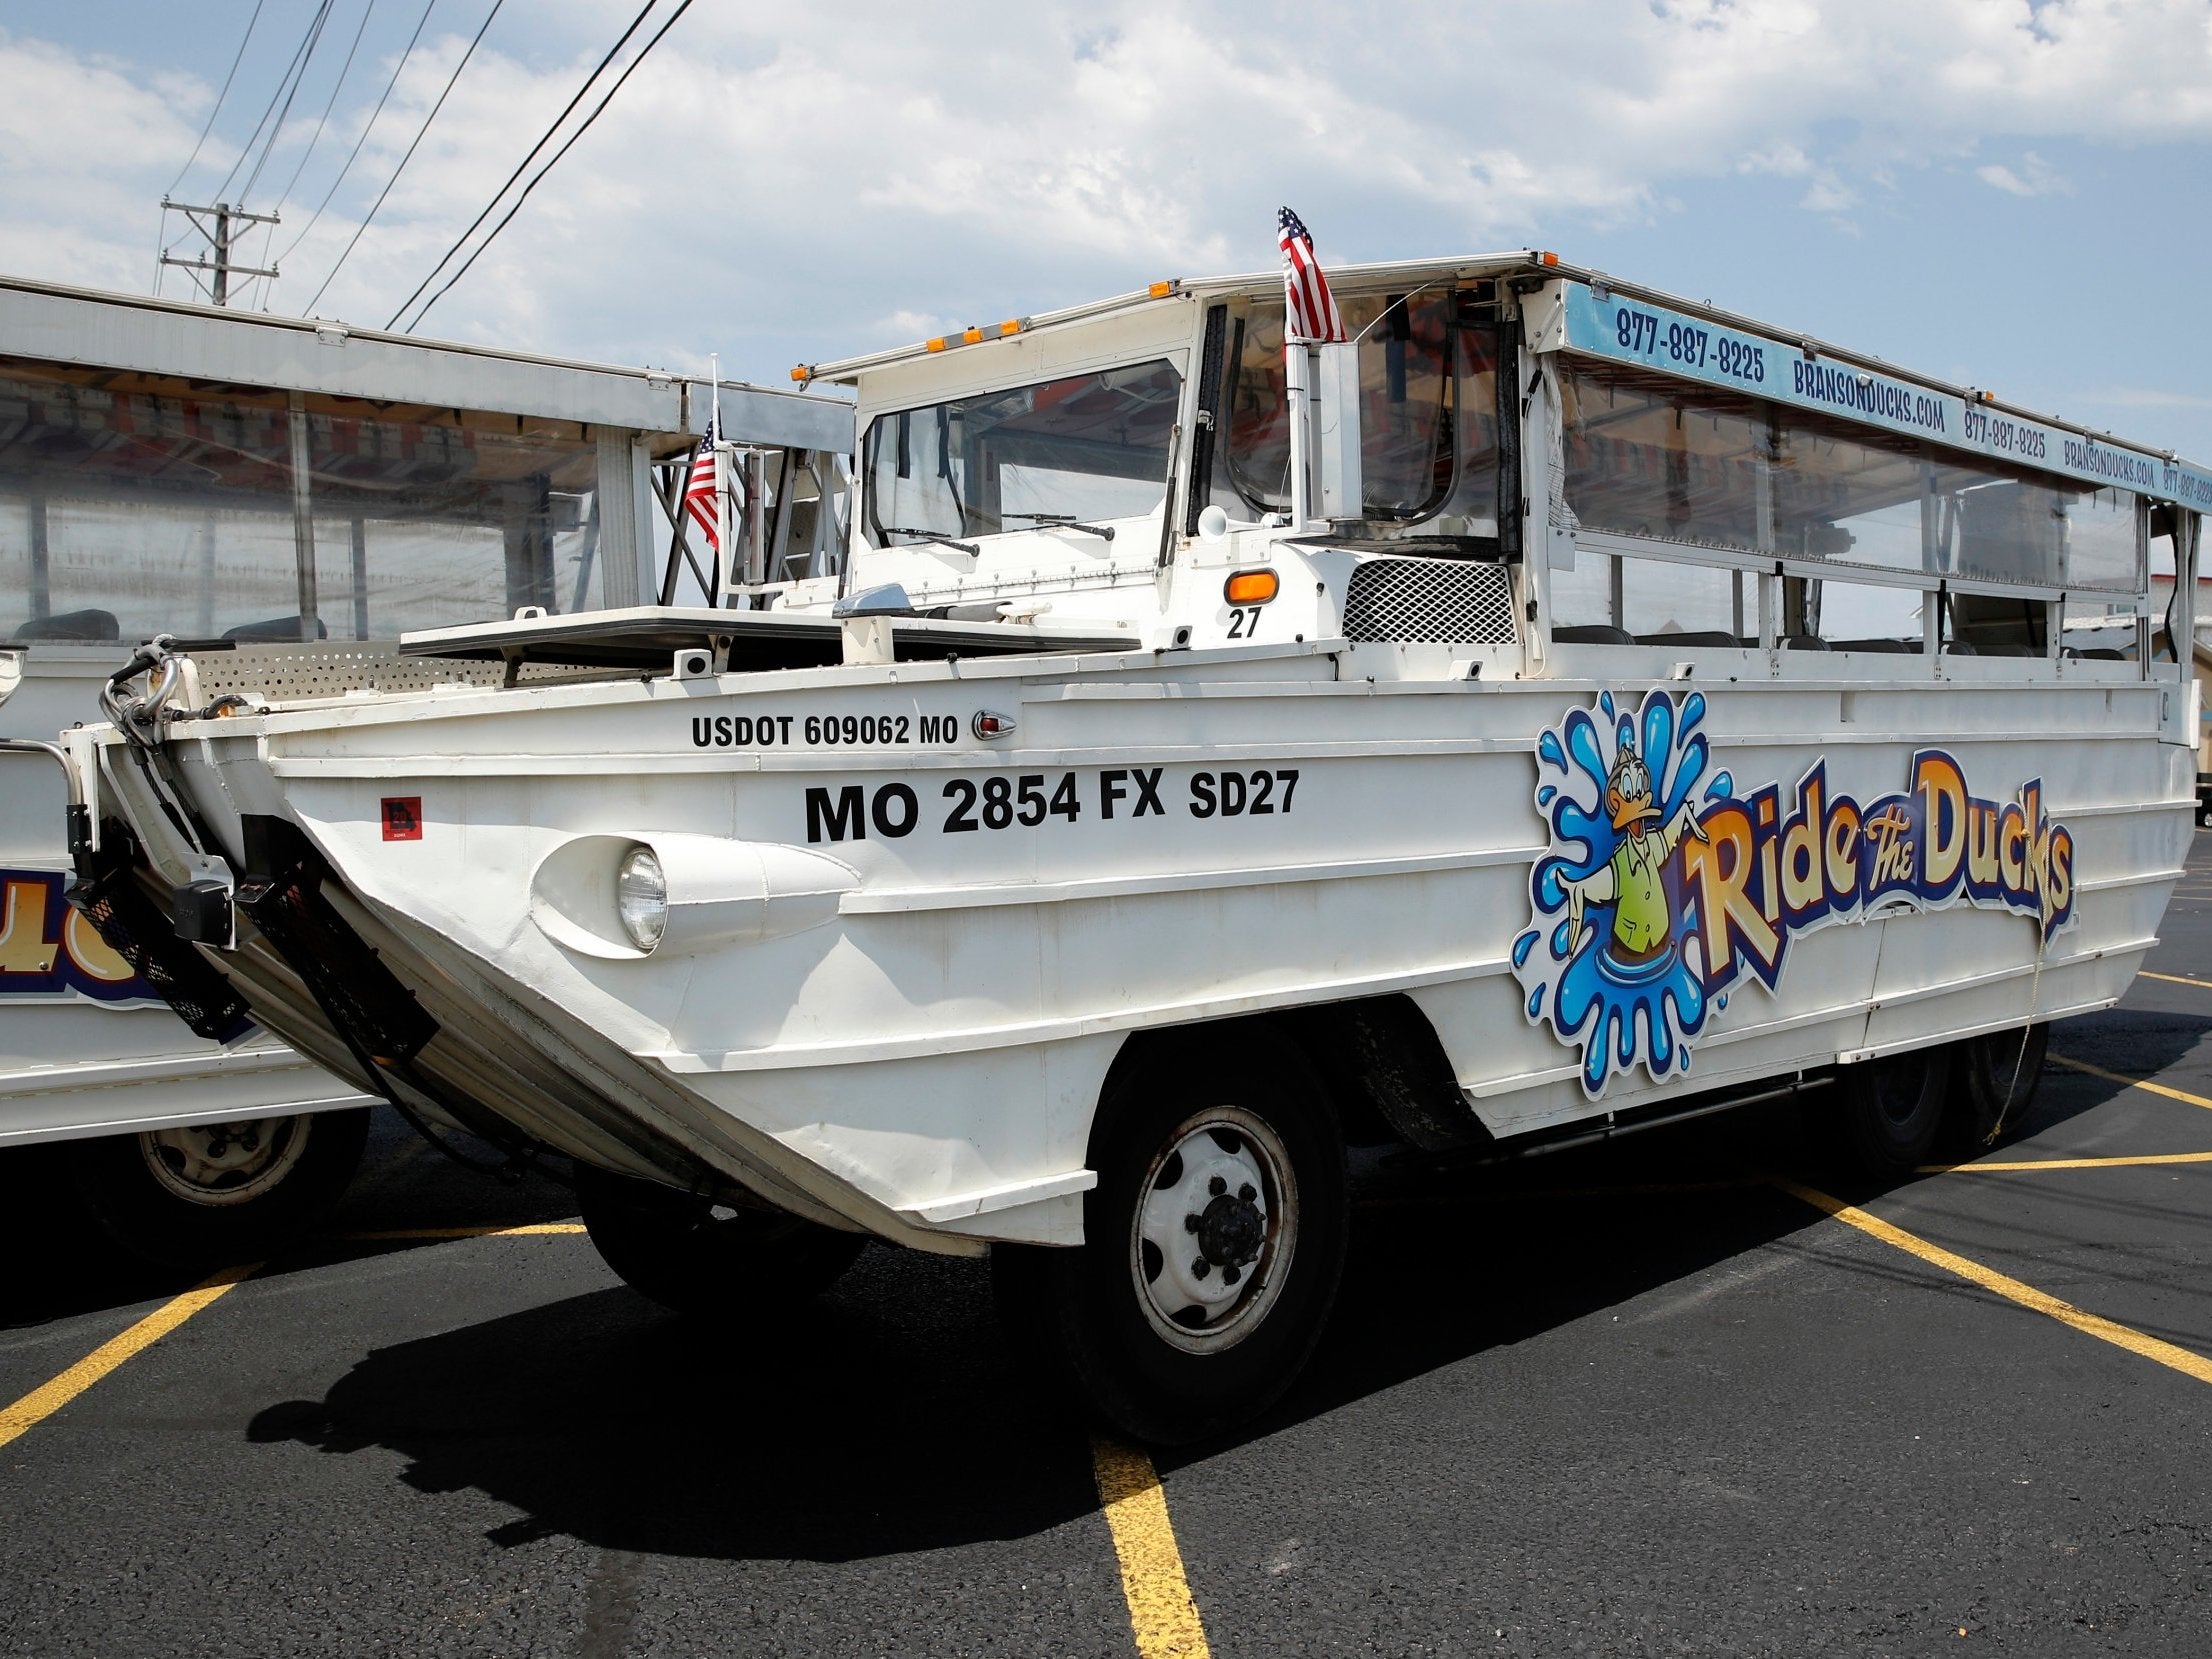 The duck tours have been suspended in Missouri following the incident